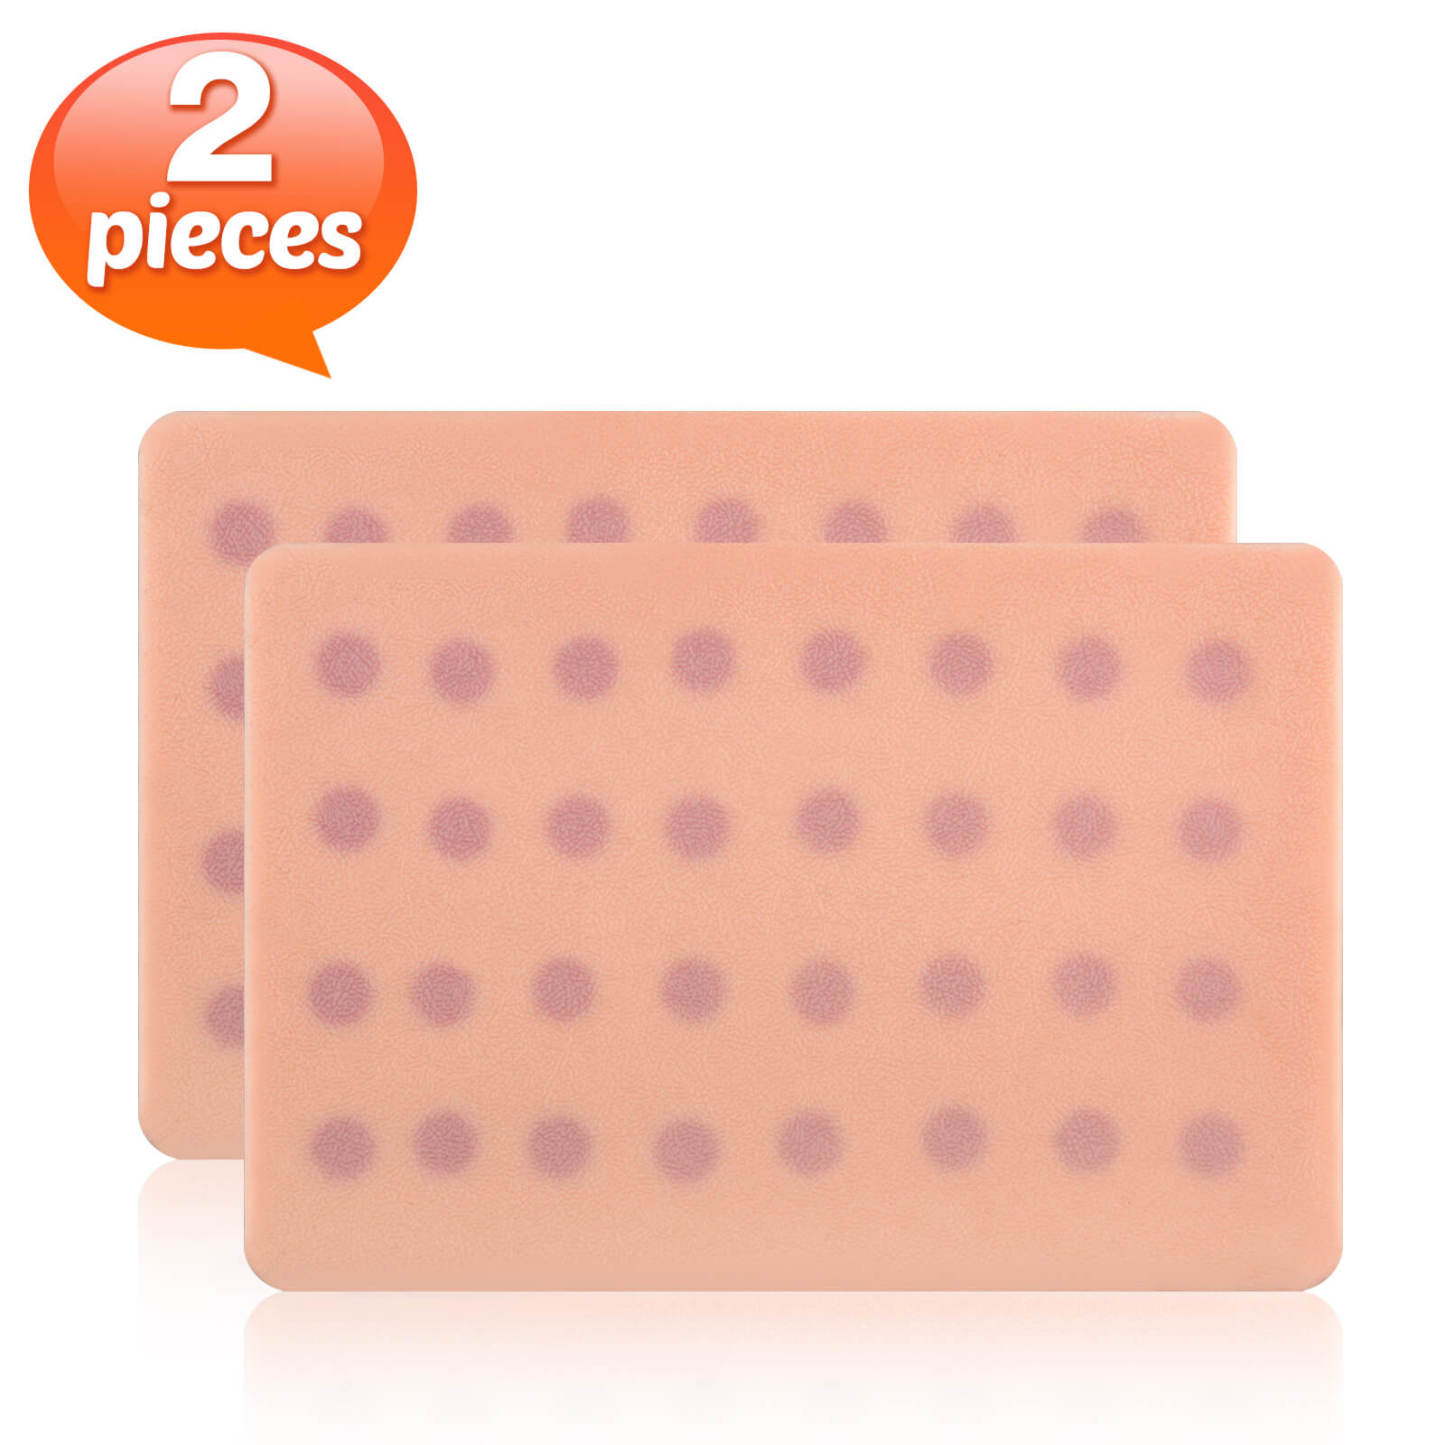 Ultrassist Injection Training Silicone Pad with Sponge for SC Practice